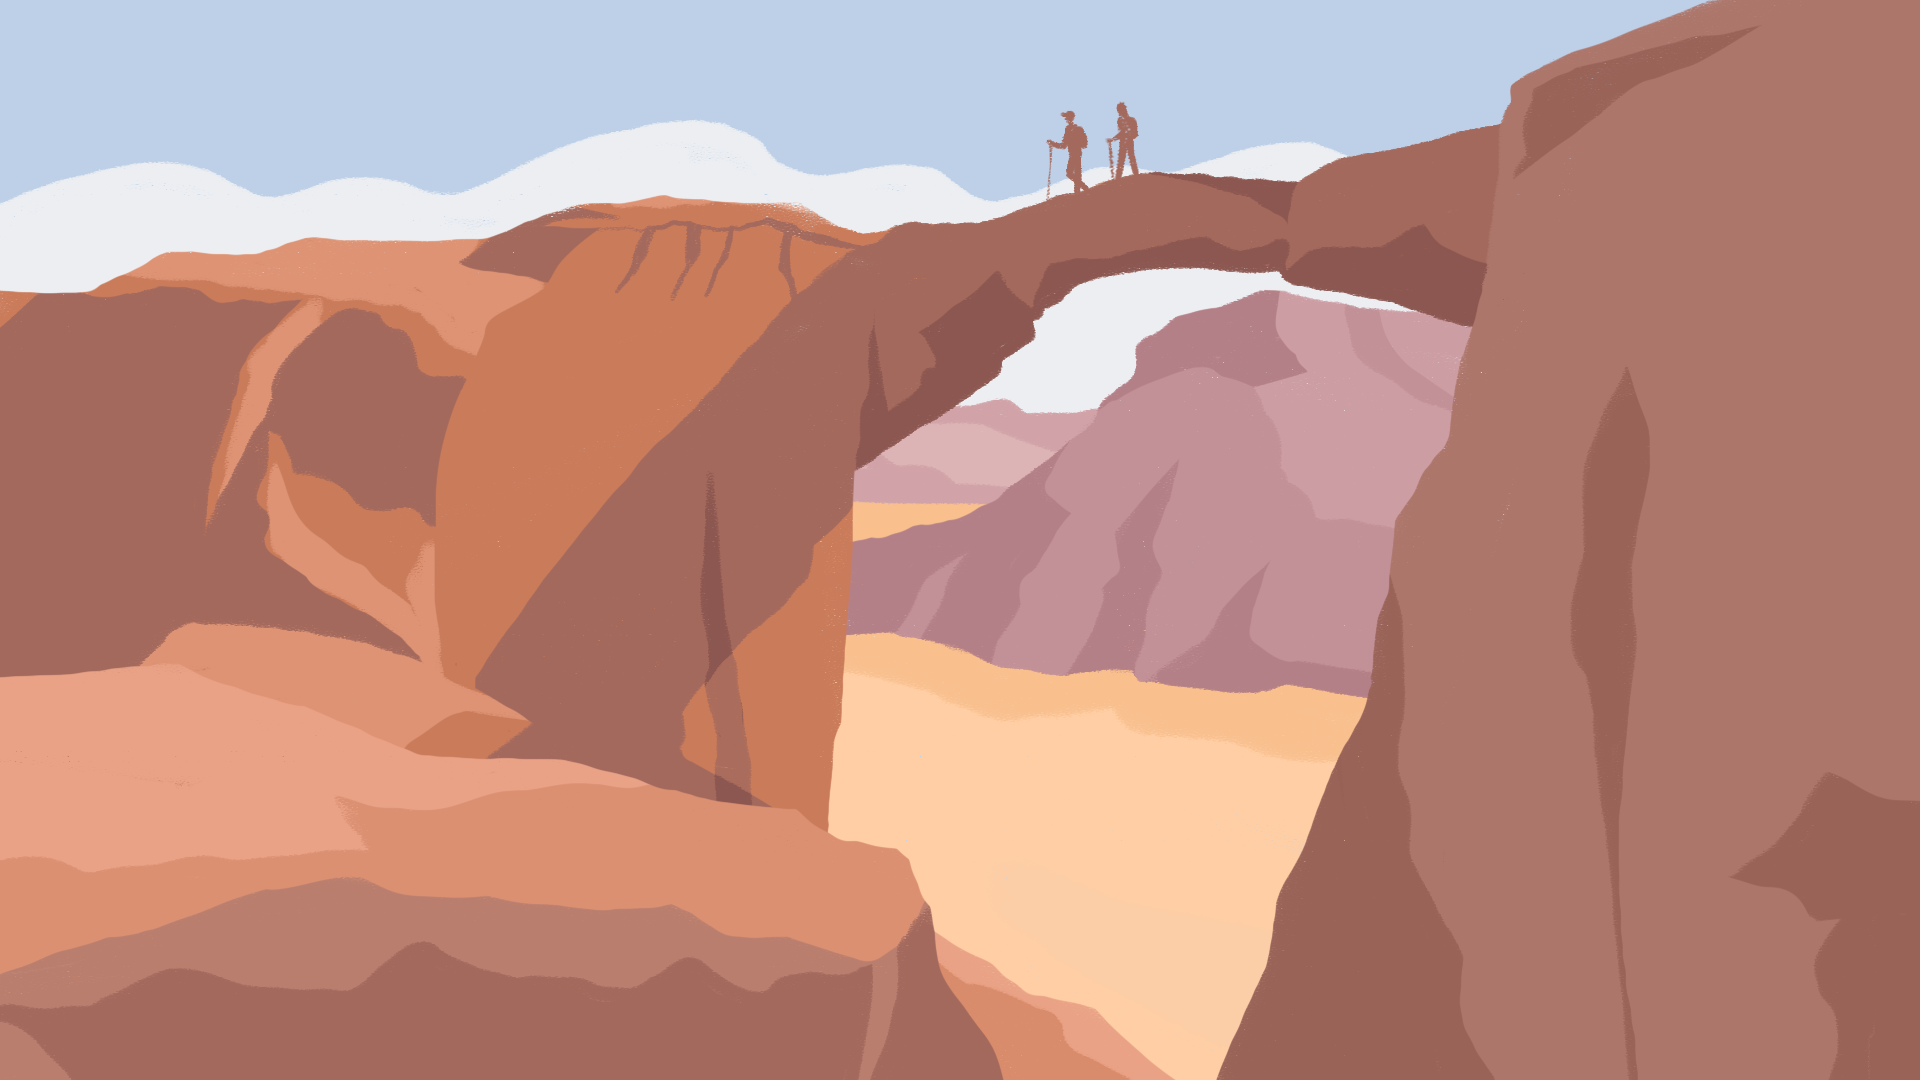 illustration of two people hiking the desert above a red arch in the Jordan Trail